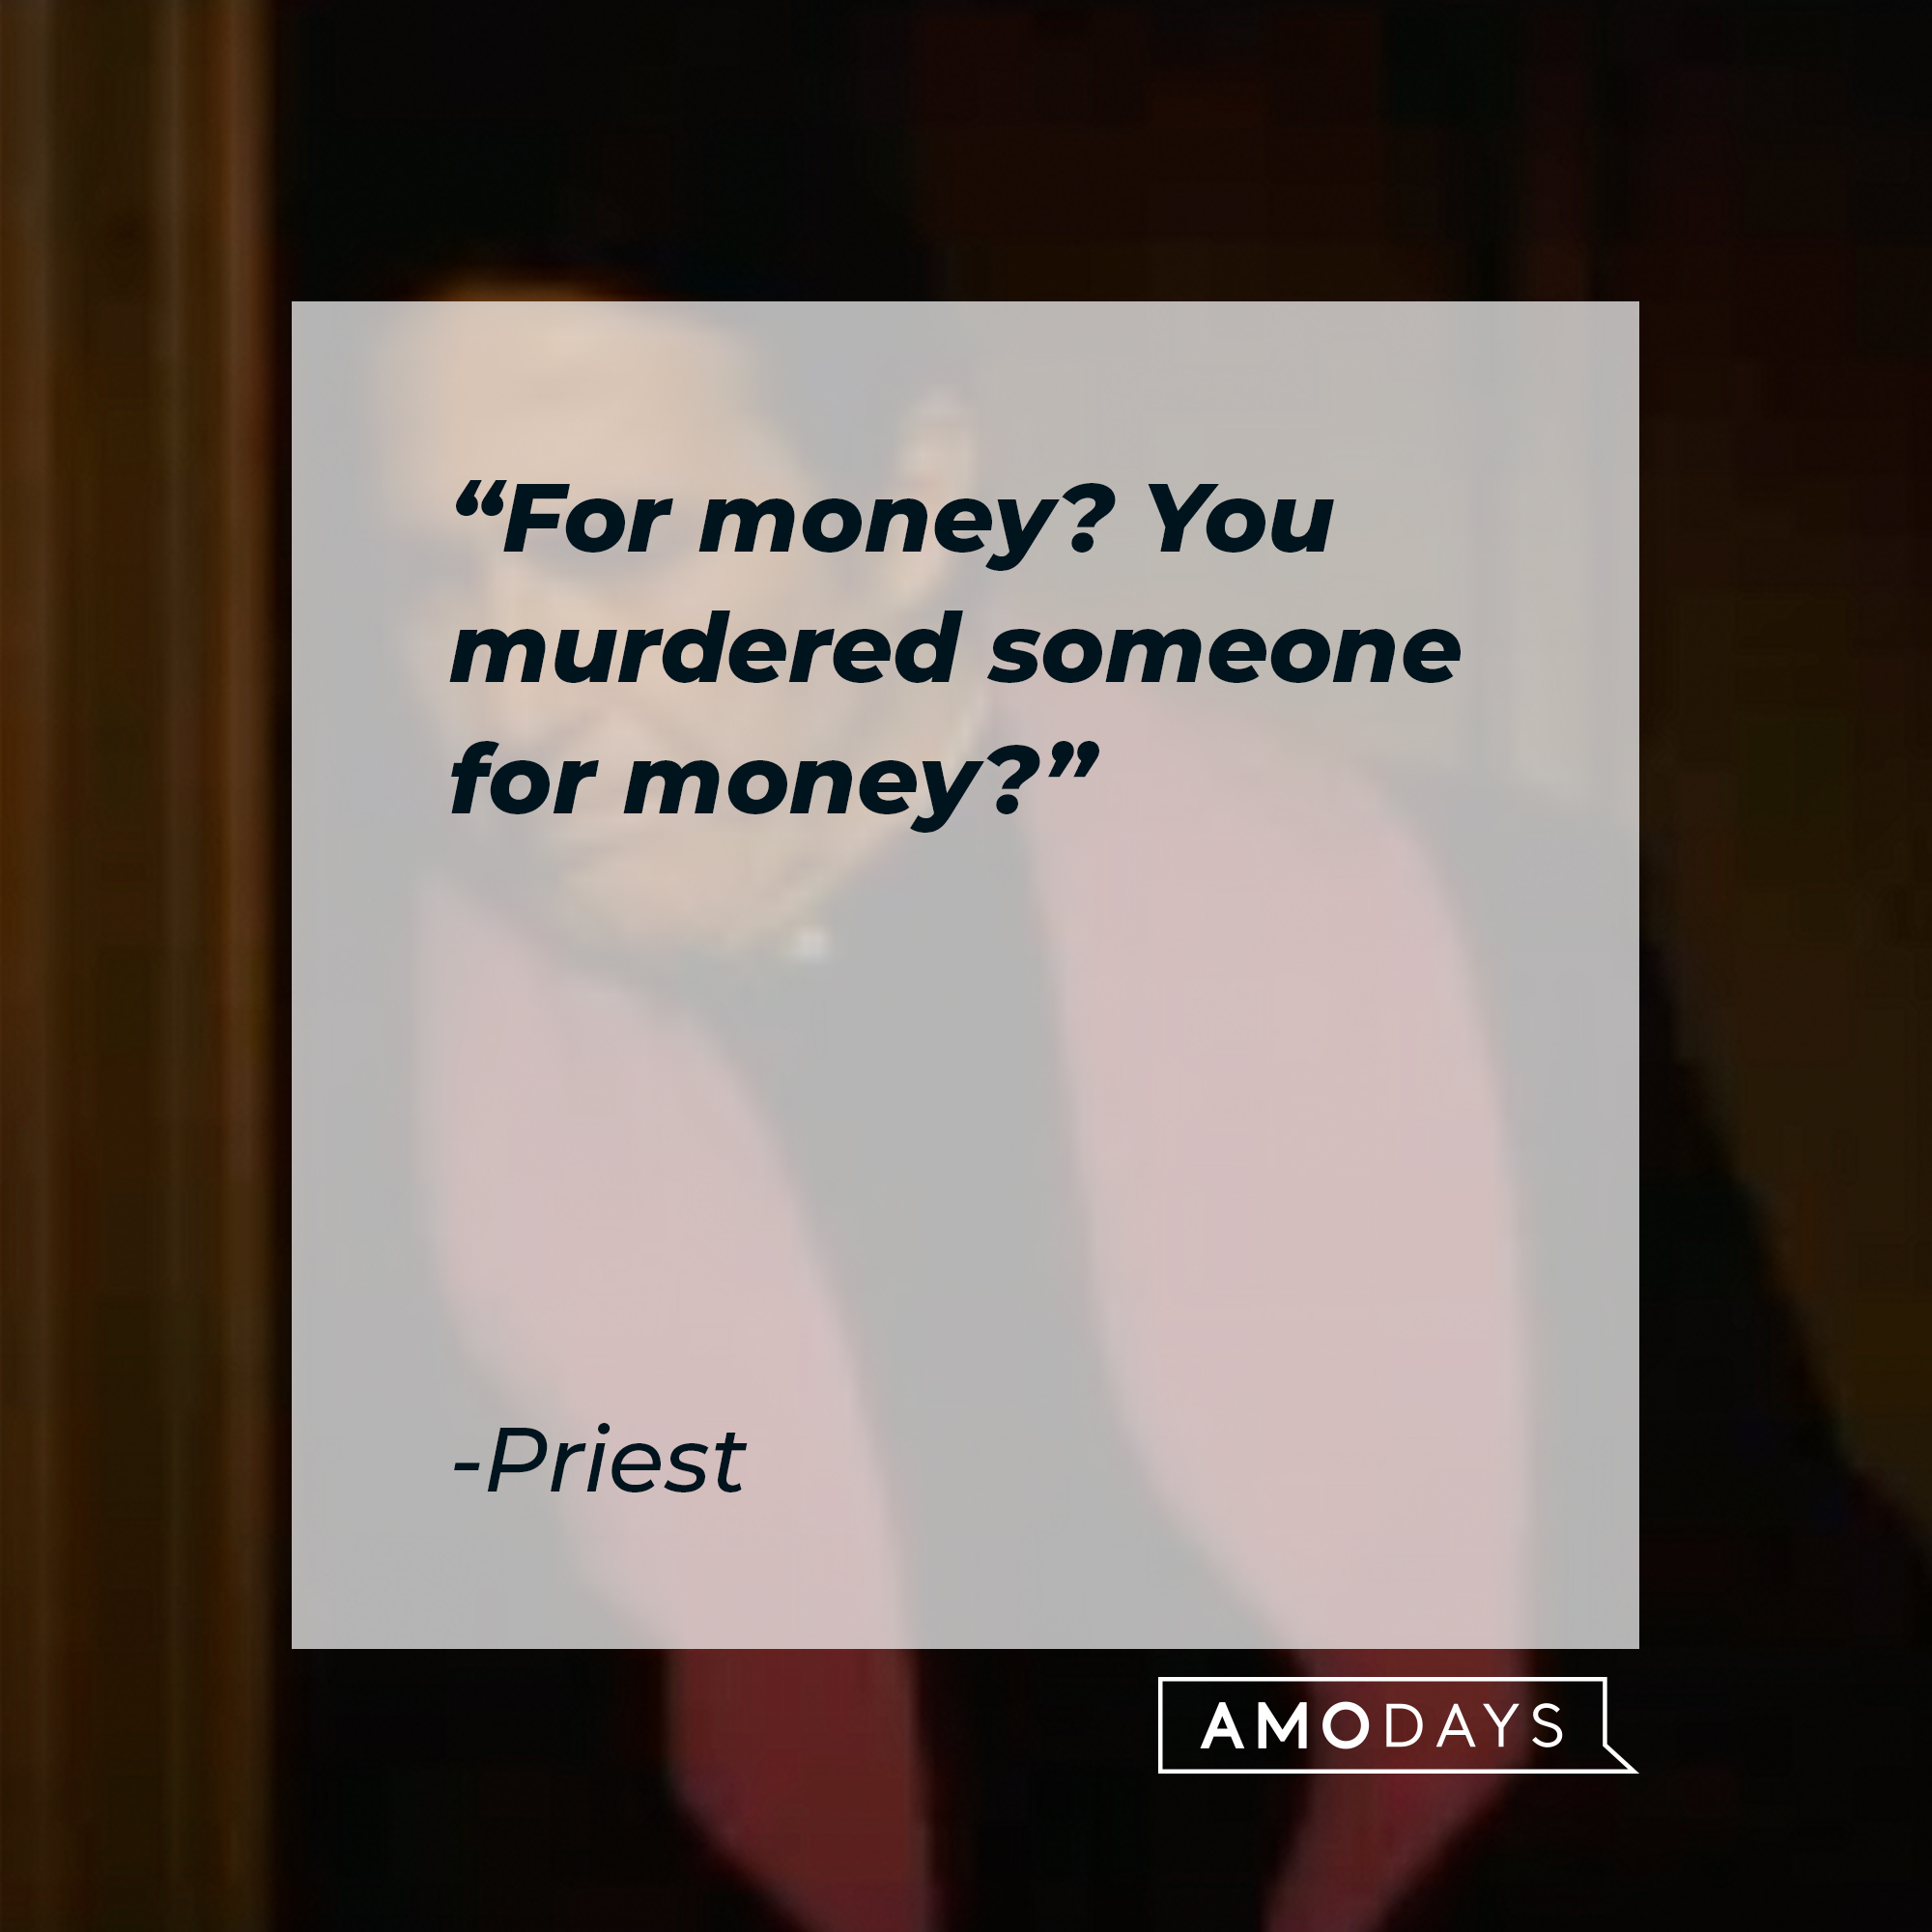 The Priest with his quote: “For money? You murdered someone for money?” | Source: Youtube.com/FocusFeatures